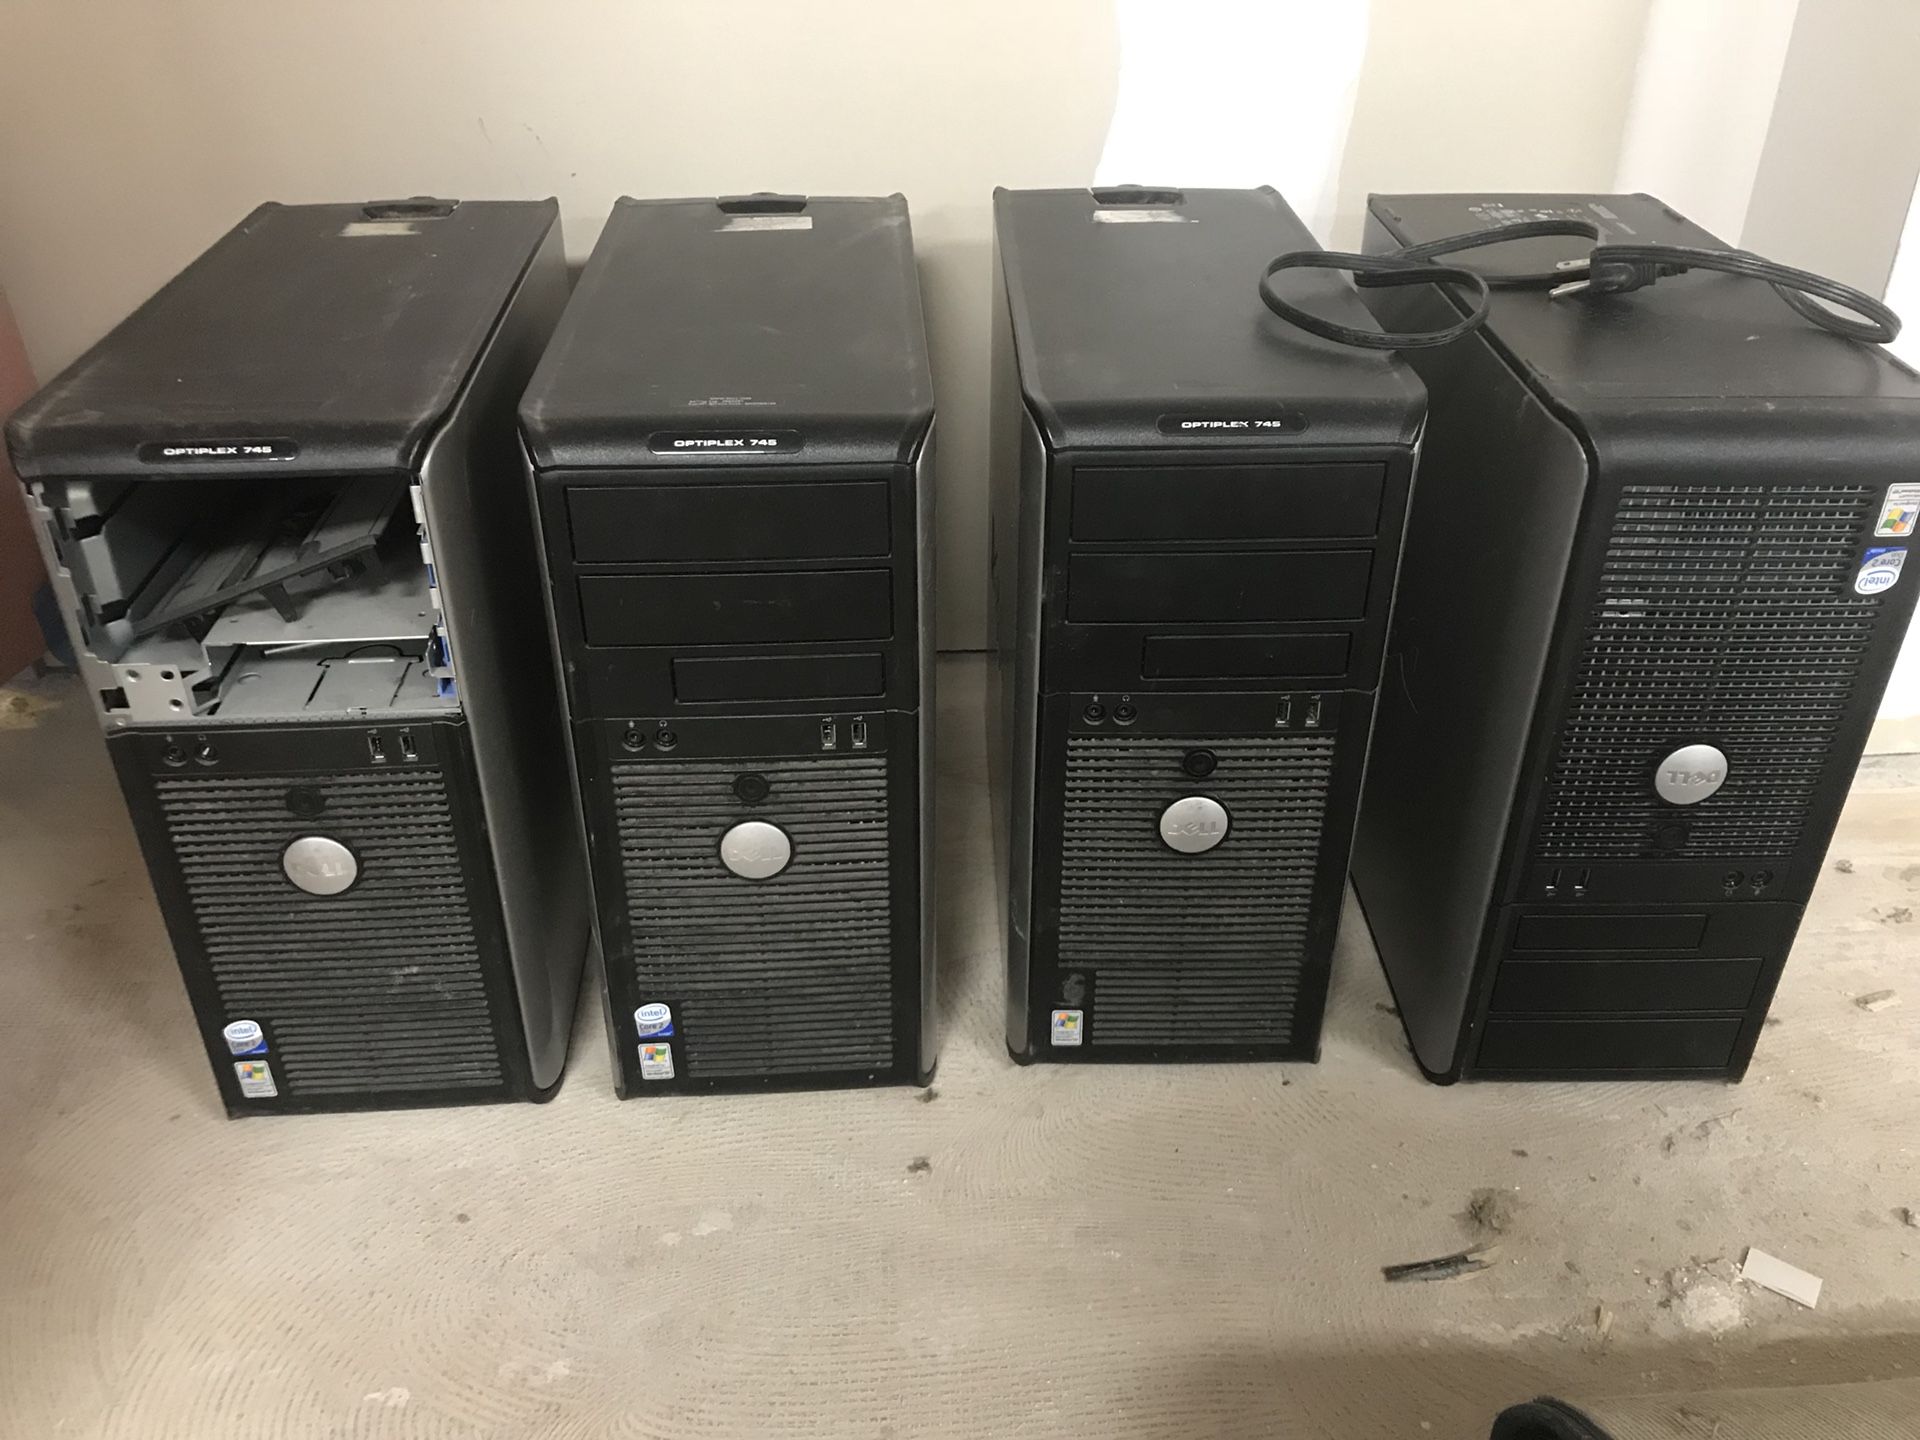 4 dell computer hard drives monitors & keyboards also available